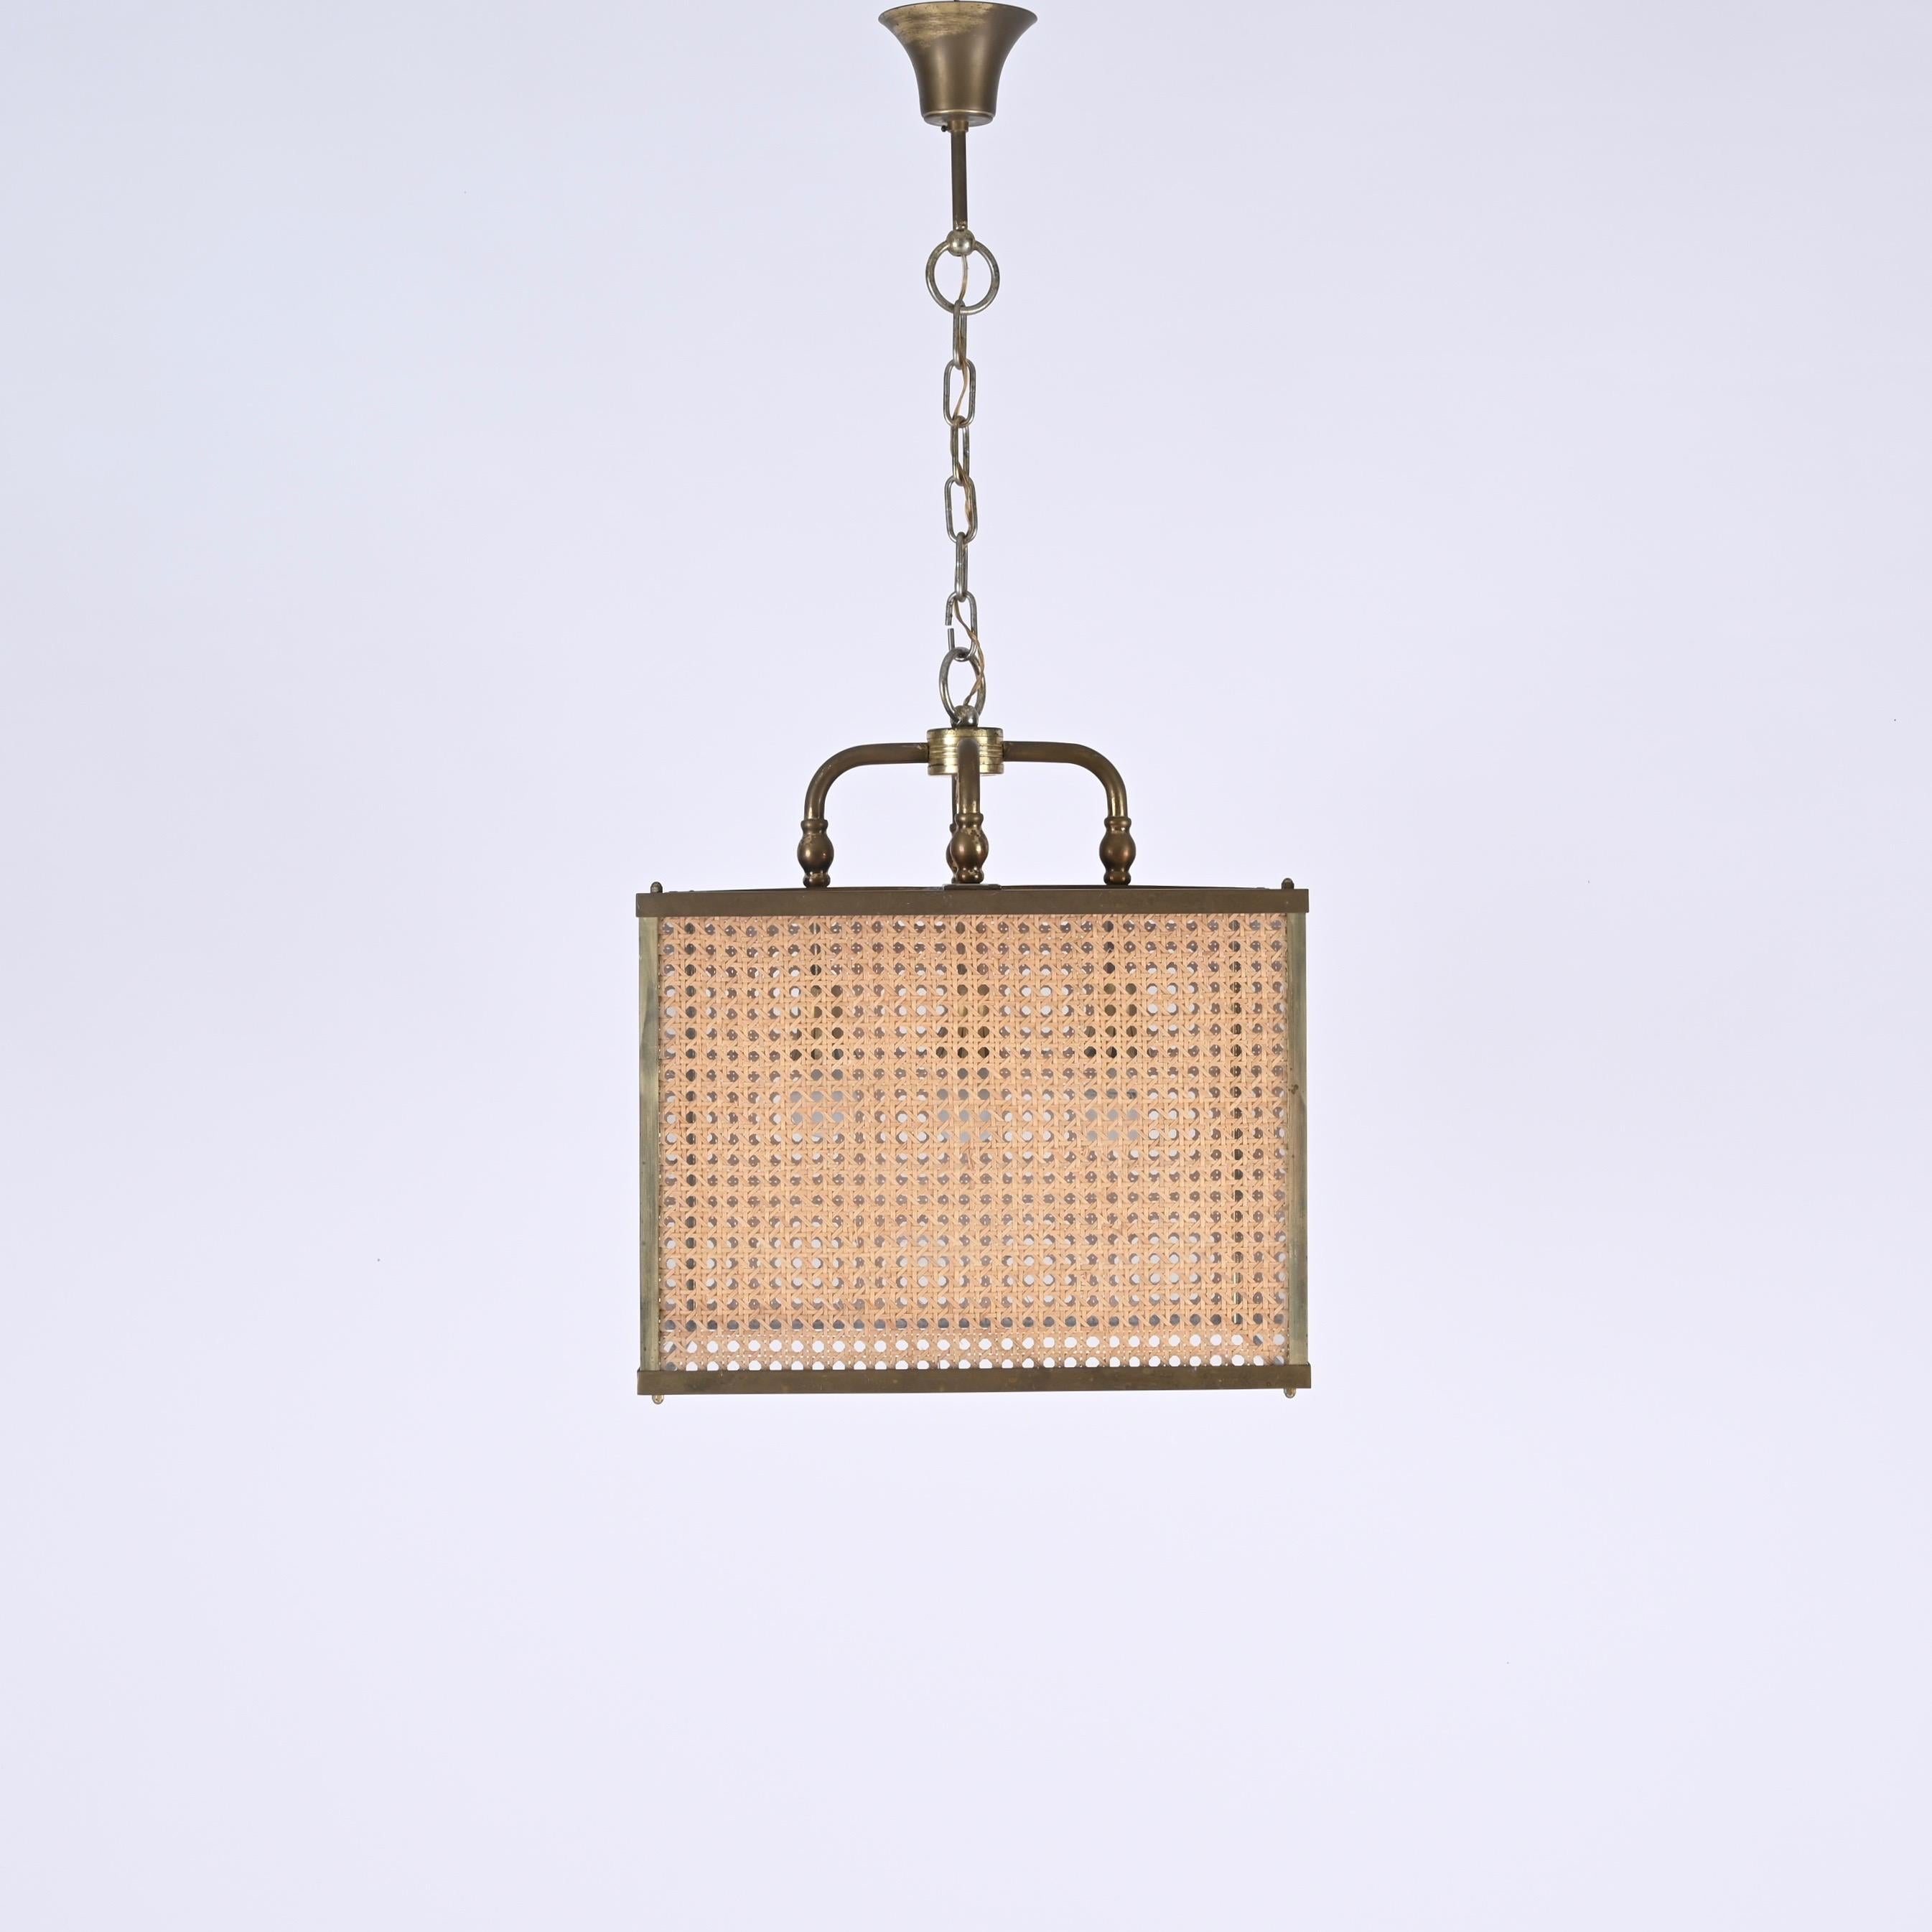 Hand-Woven Brass, Vienna Straw Wicker and Glass Square Chandelier Lamp, Italy, 1950s For Sale